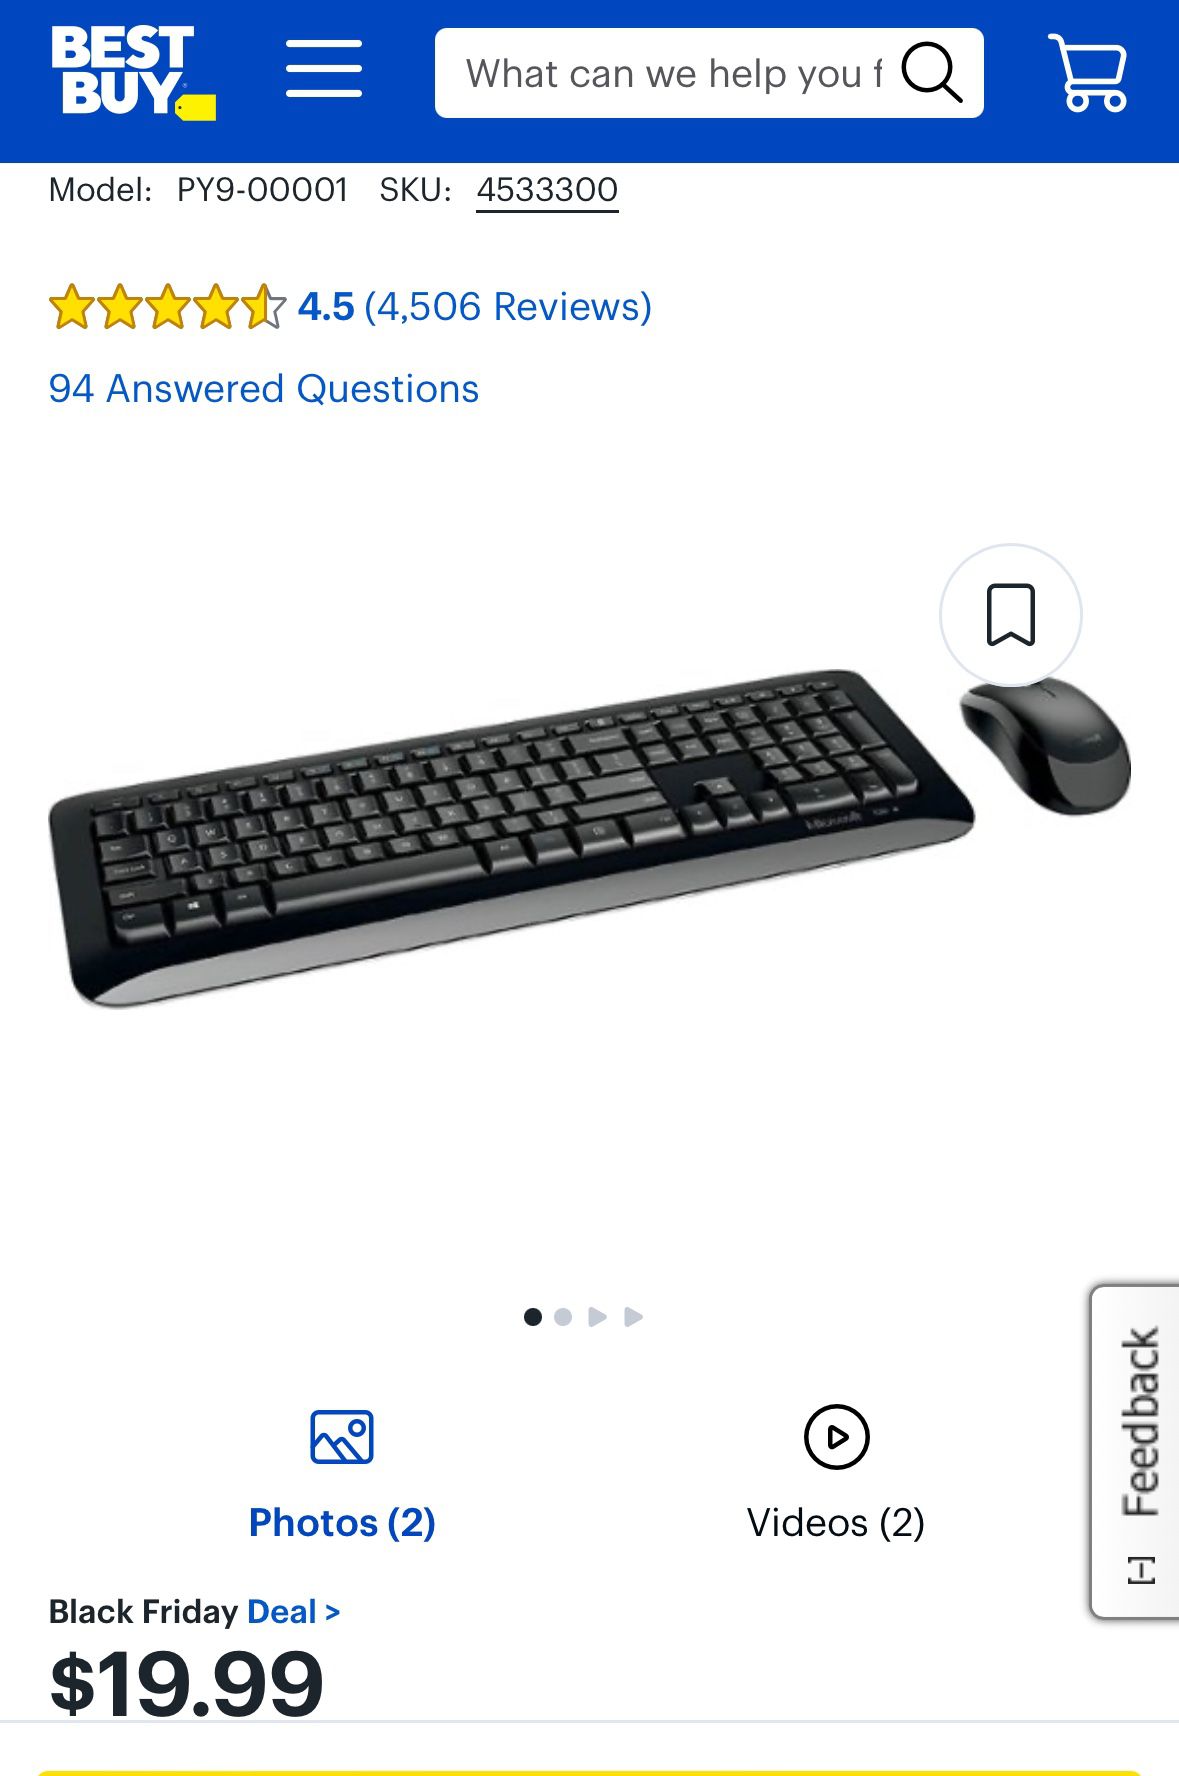 Microsoft Wireless  Keyboard With Mouse (usb Wired)